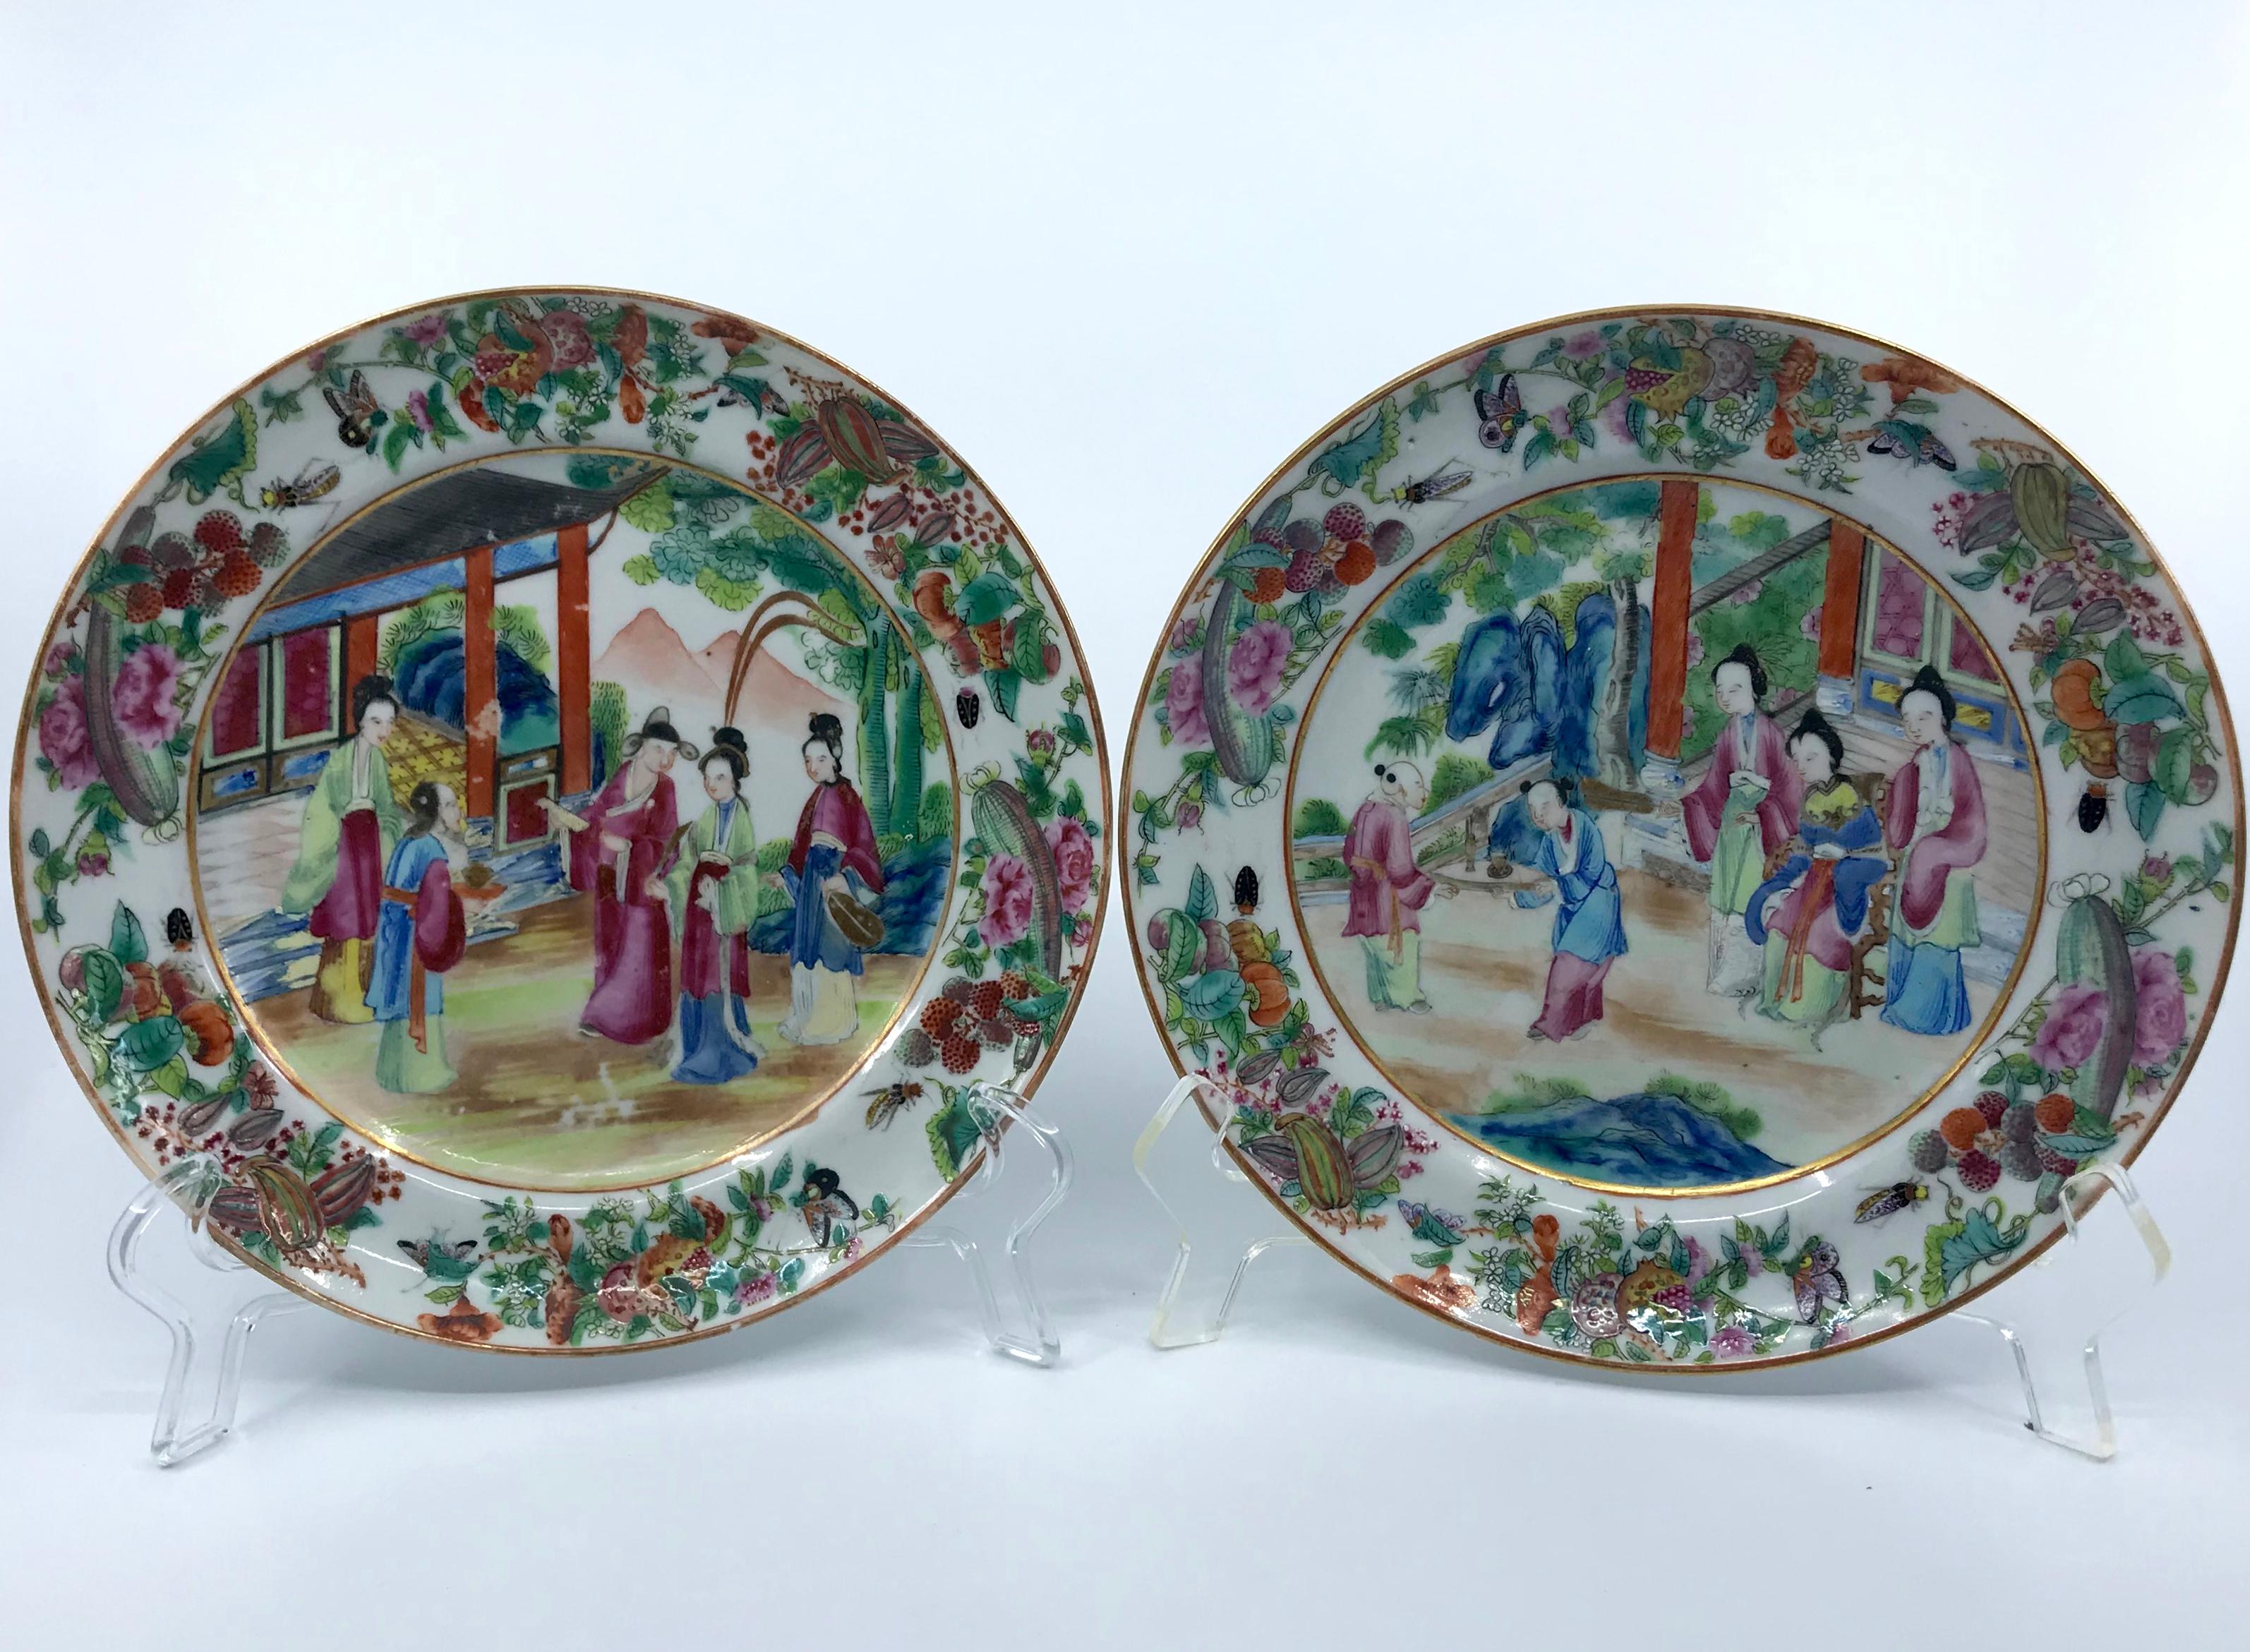 Pair of rose Mandarin Chinese porcelain plates. Vibrantly hued and gilt painted Chinese Export luncheon plates in pinks and blues and greens. China, circa 1820's
Dimensions: 7.88